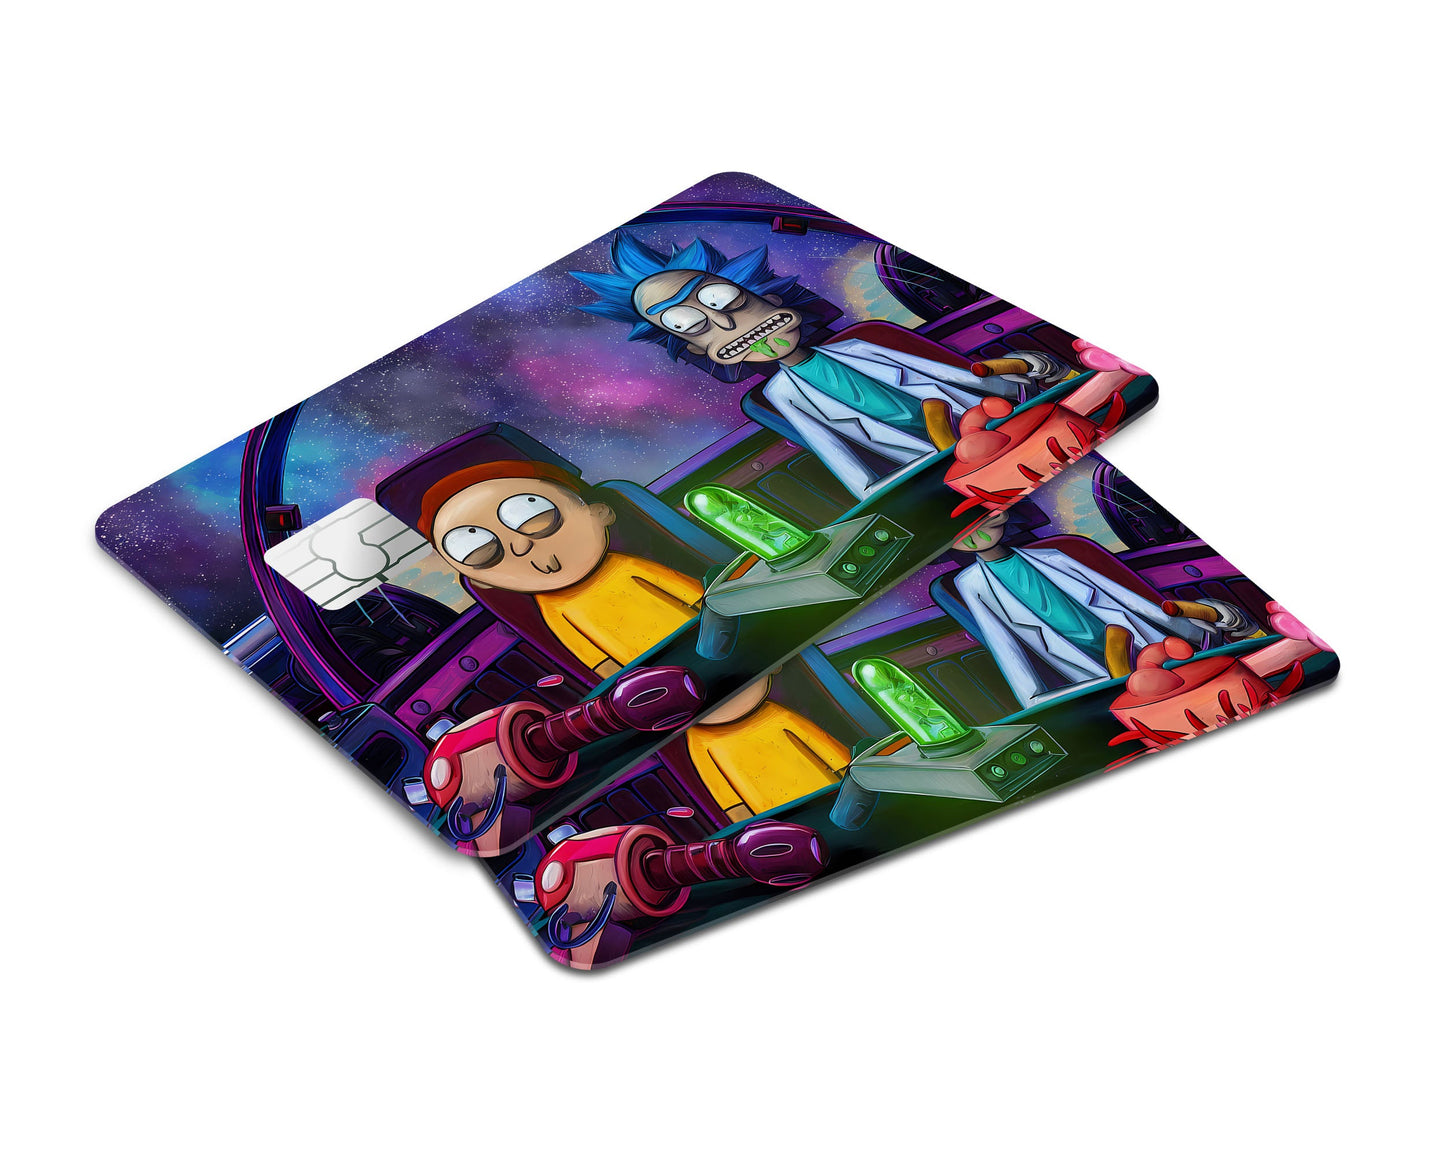 Anime Town Creations Credit Card Rick and Morty Spaceship Window Skins - Anime Rick and Morty Credit Card Skin